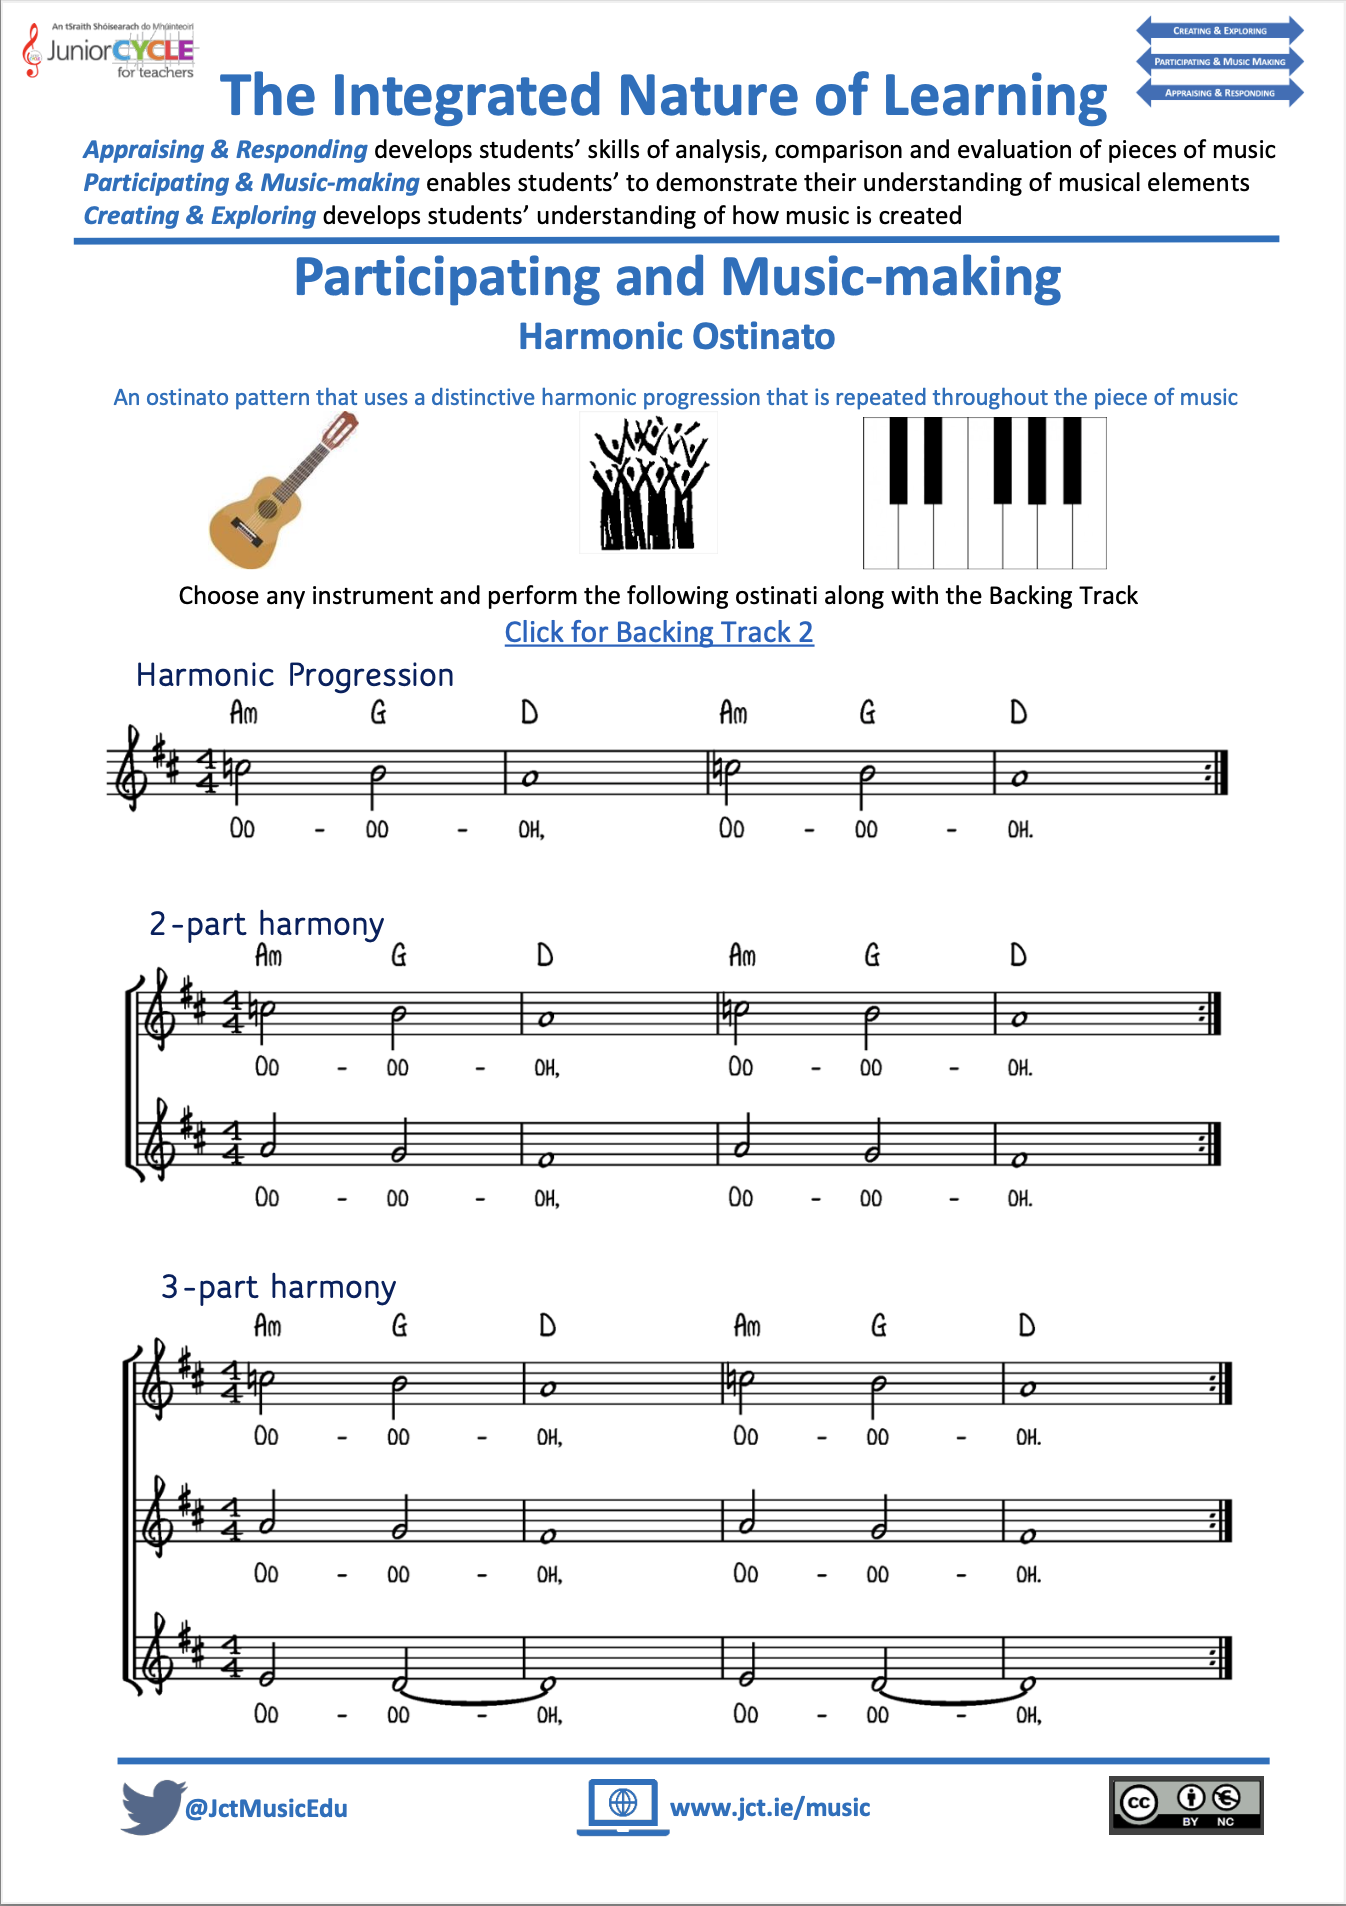 The Integrated Nature of Learning: Participating and Music-Making (Harmonic Ostinato 2)